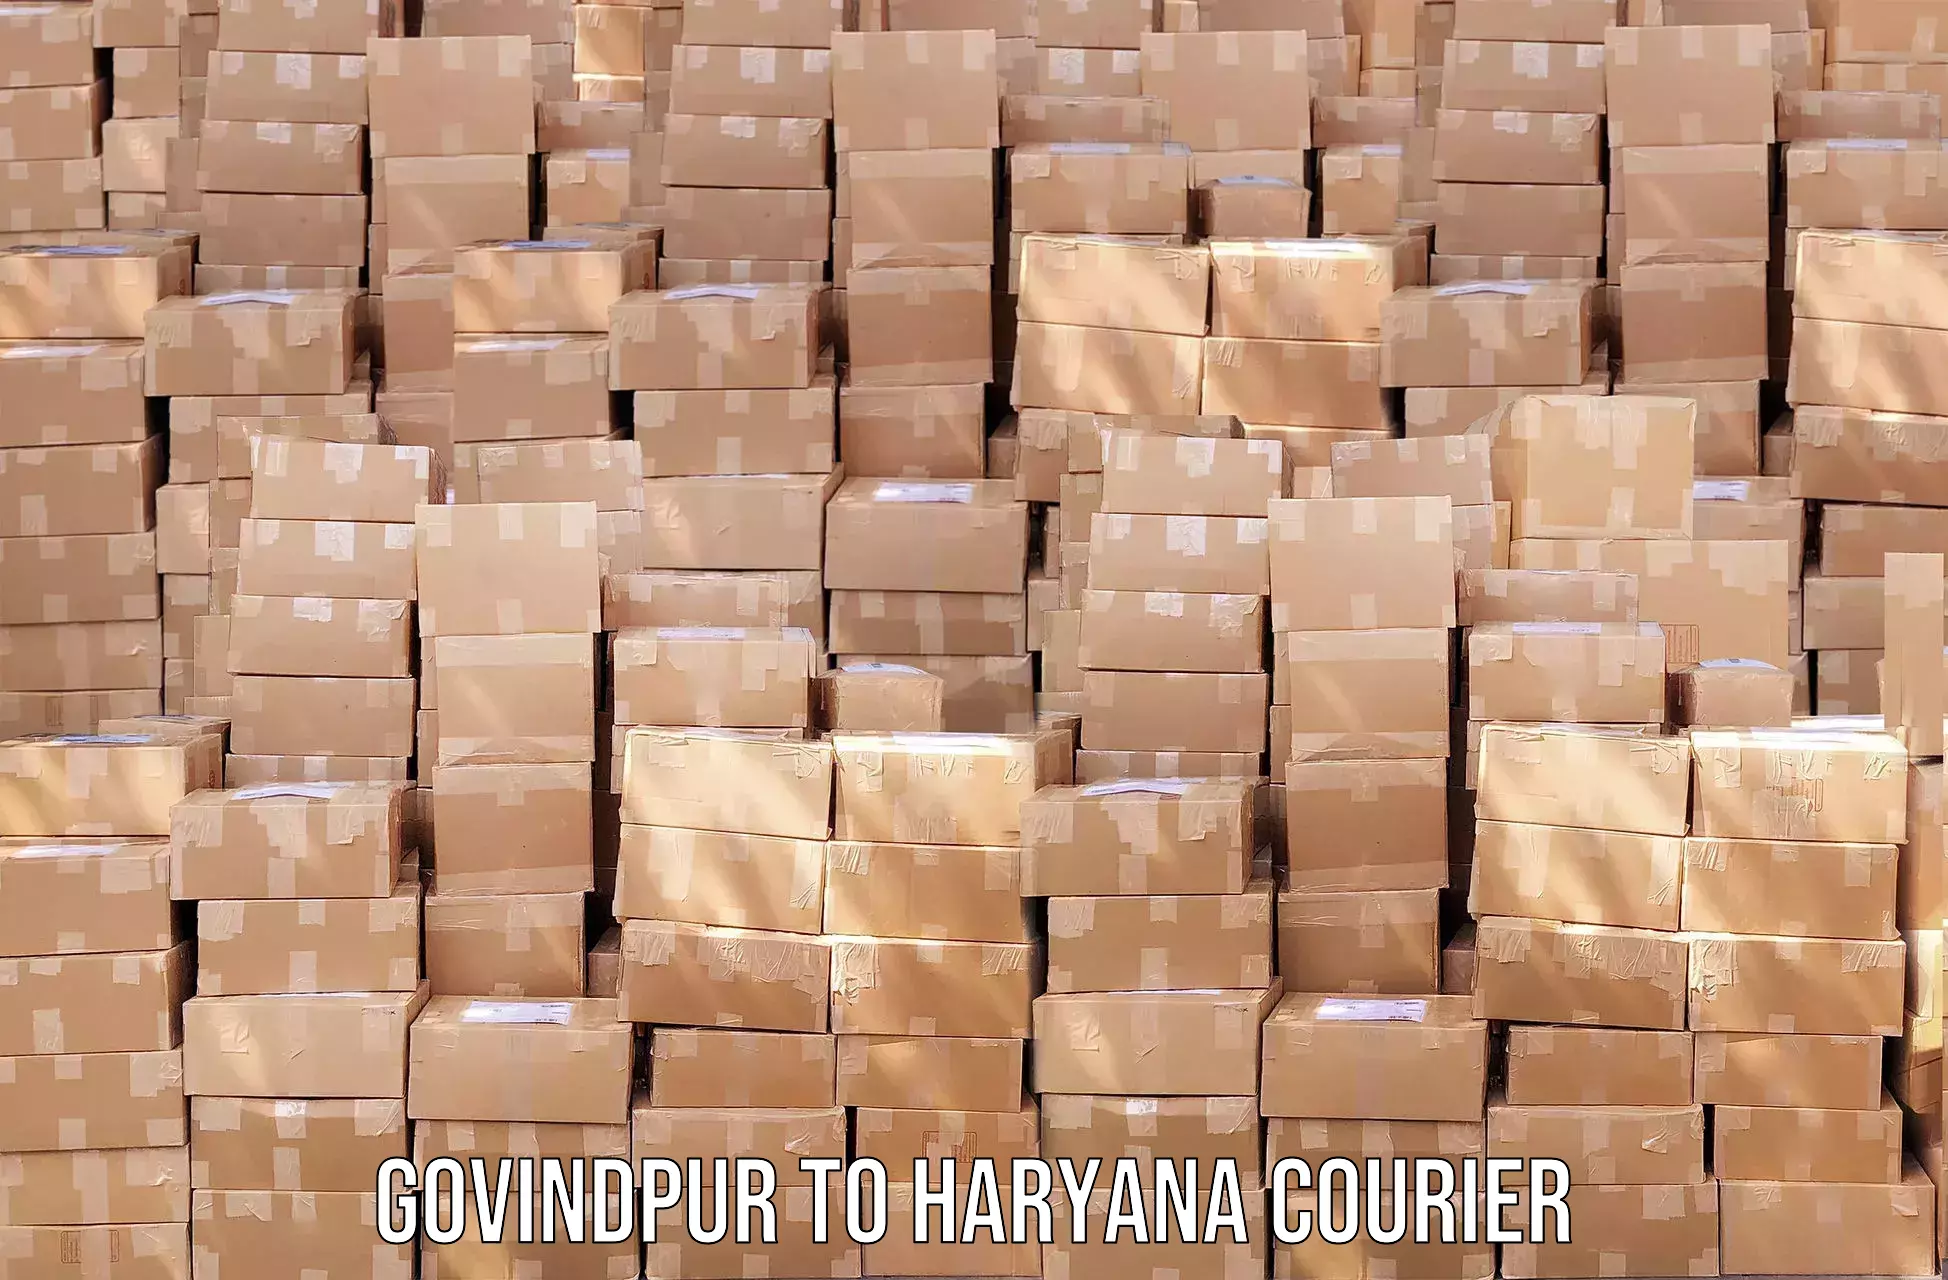 Dynamic courier operations in Govindpur to Chaudhary Charan Singh Haryana Agricultural University Hisar